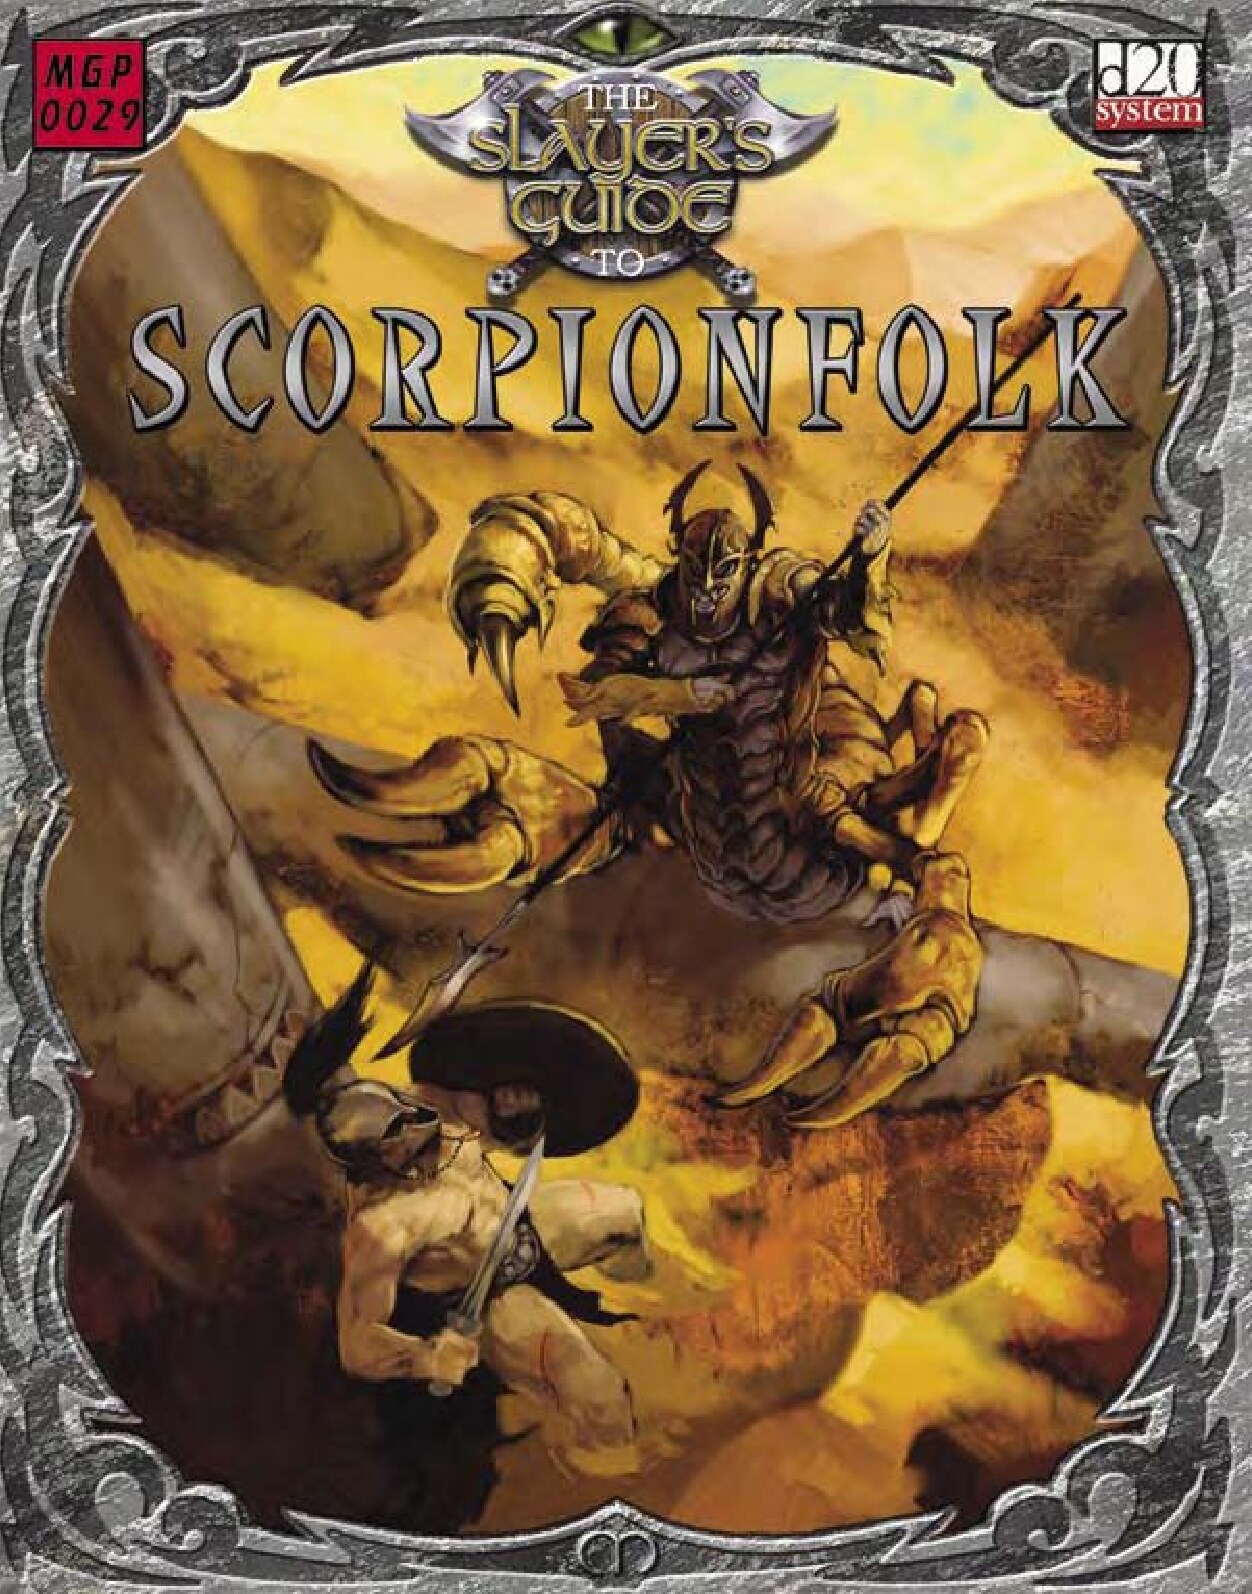 The Slayer's Guide to Scorpionfolk